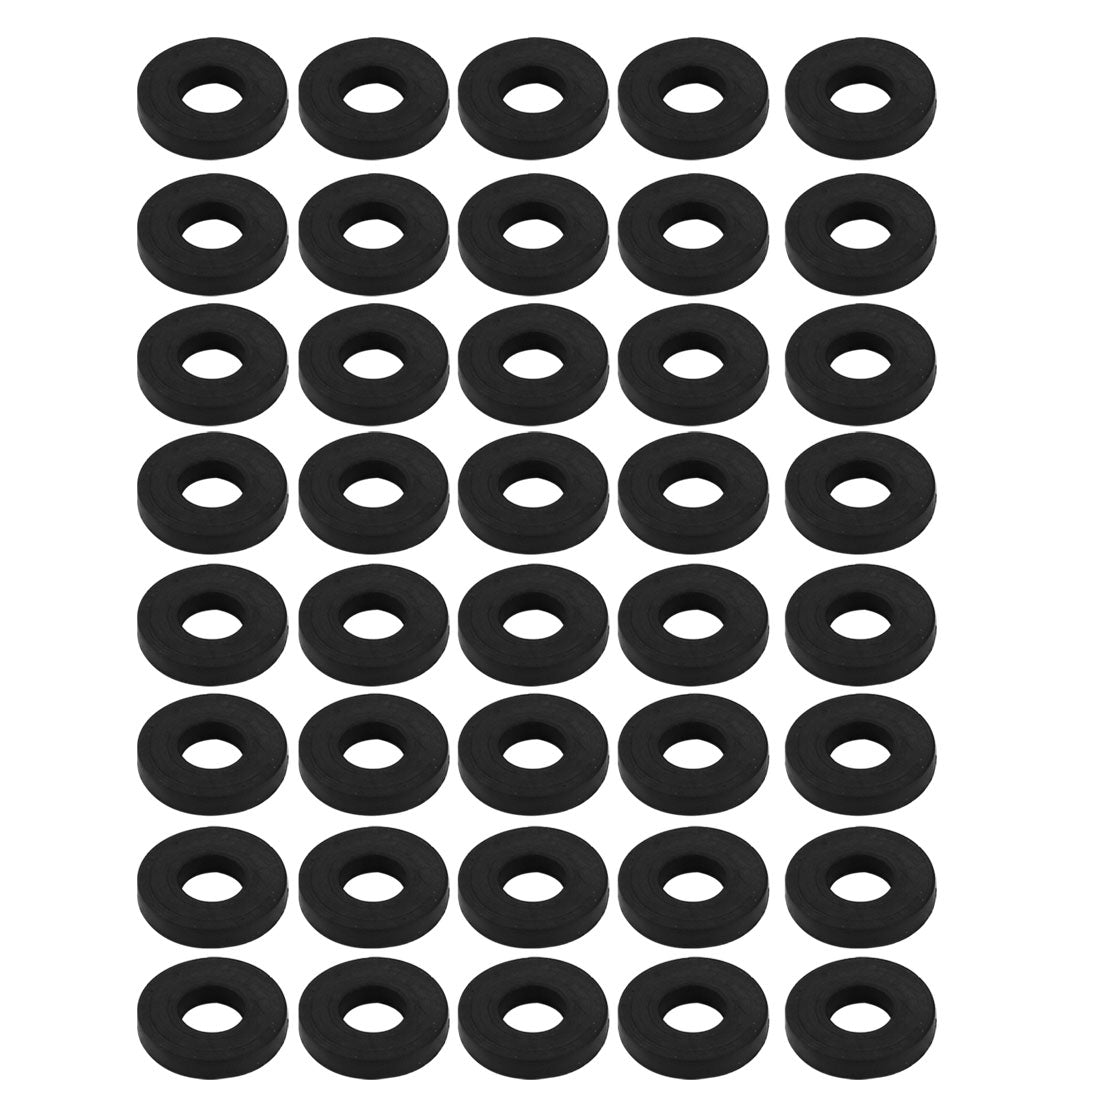 Uxcell Uxcell 40pcs Black Rubber Round Flat Washer Assortment Size 6x14x2.5mm Flat Washer